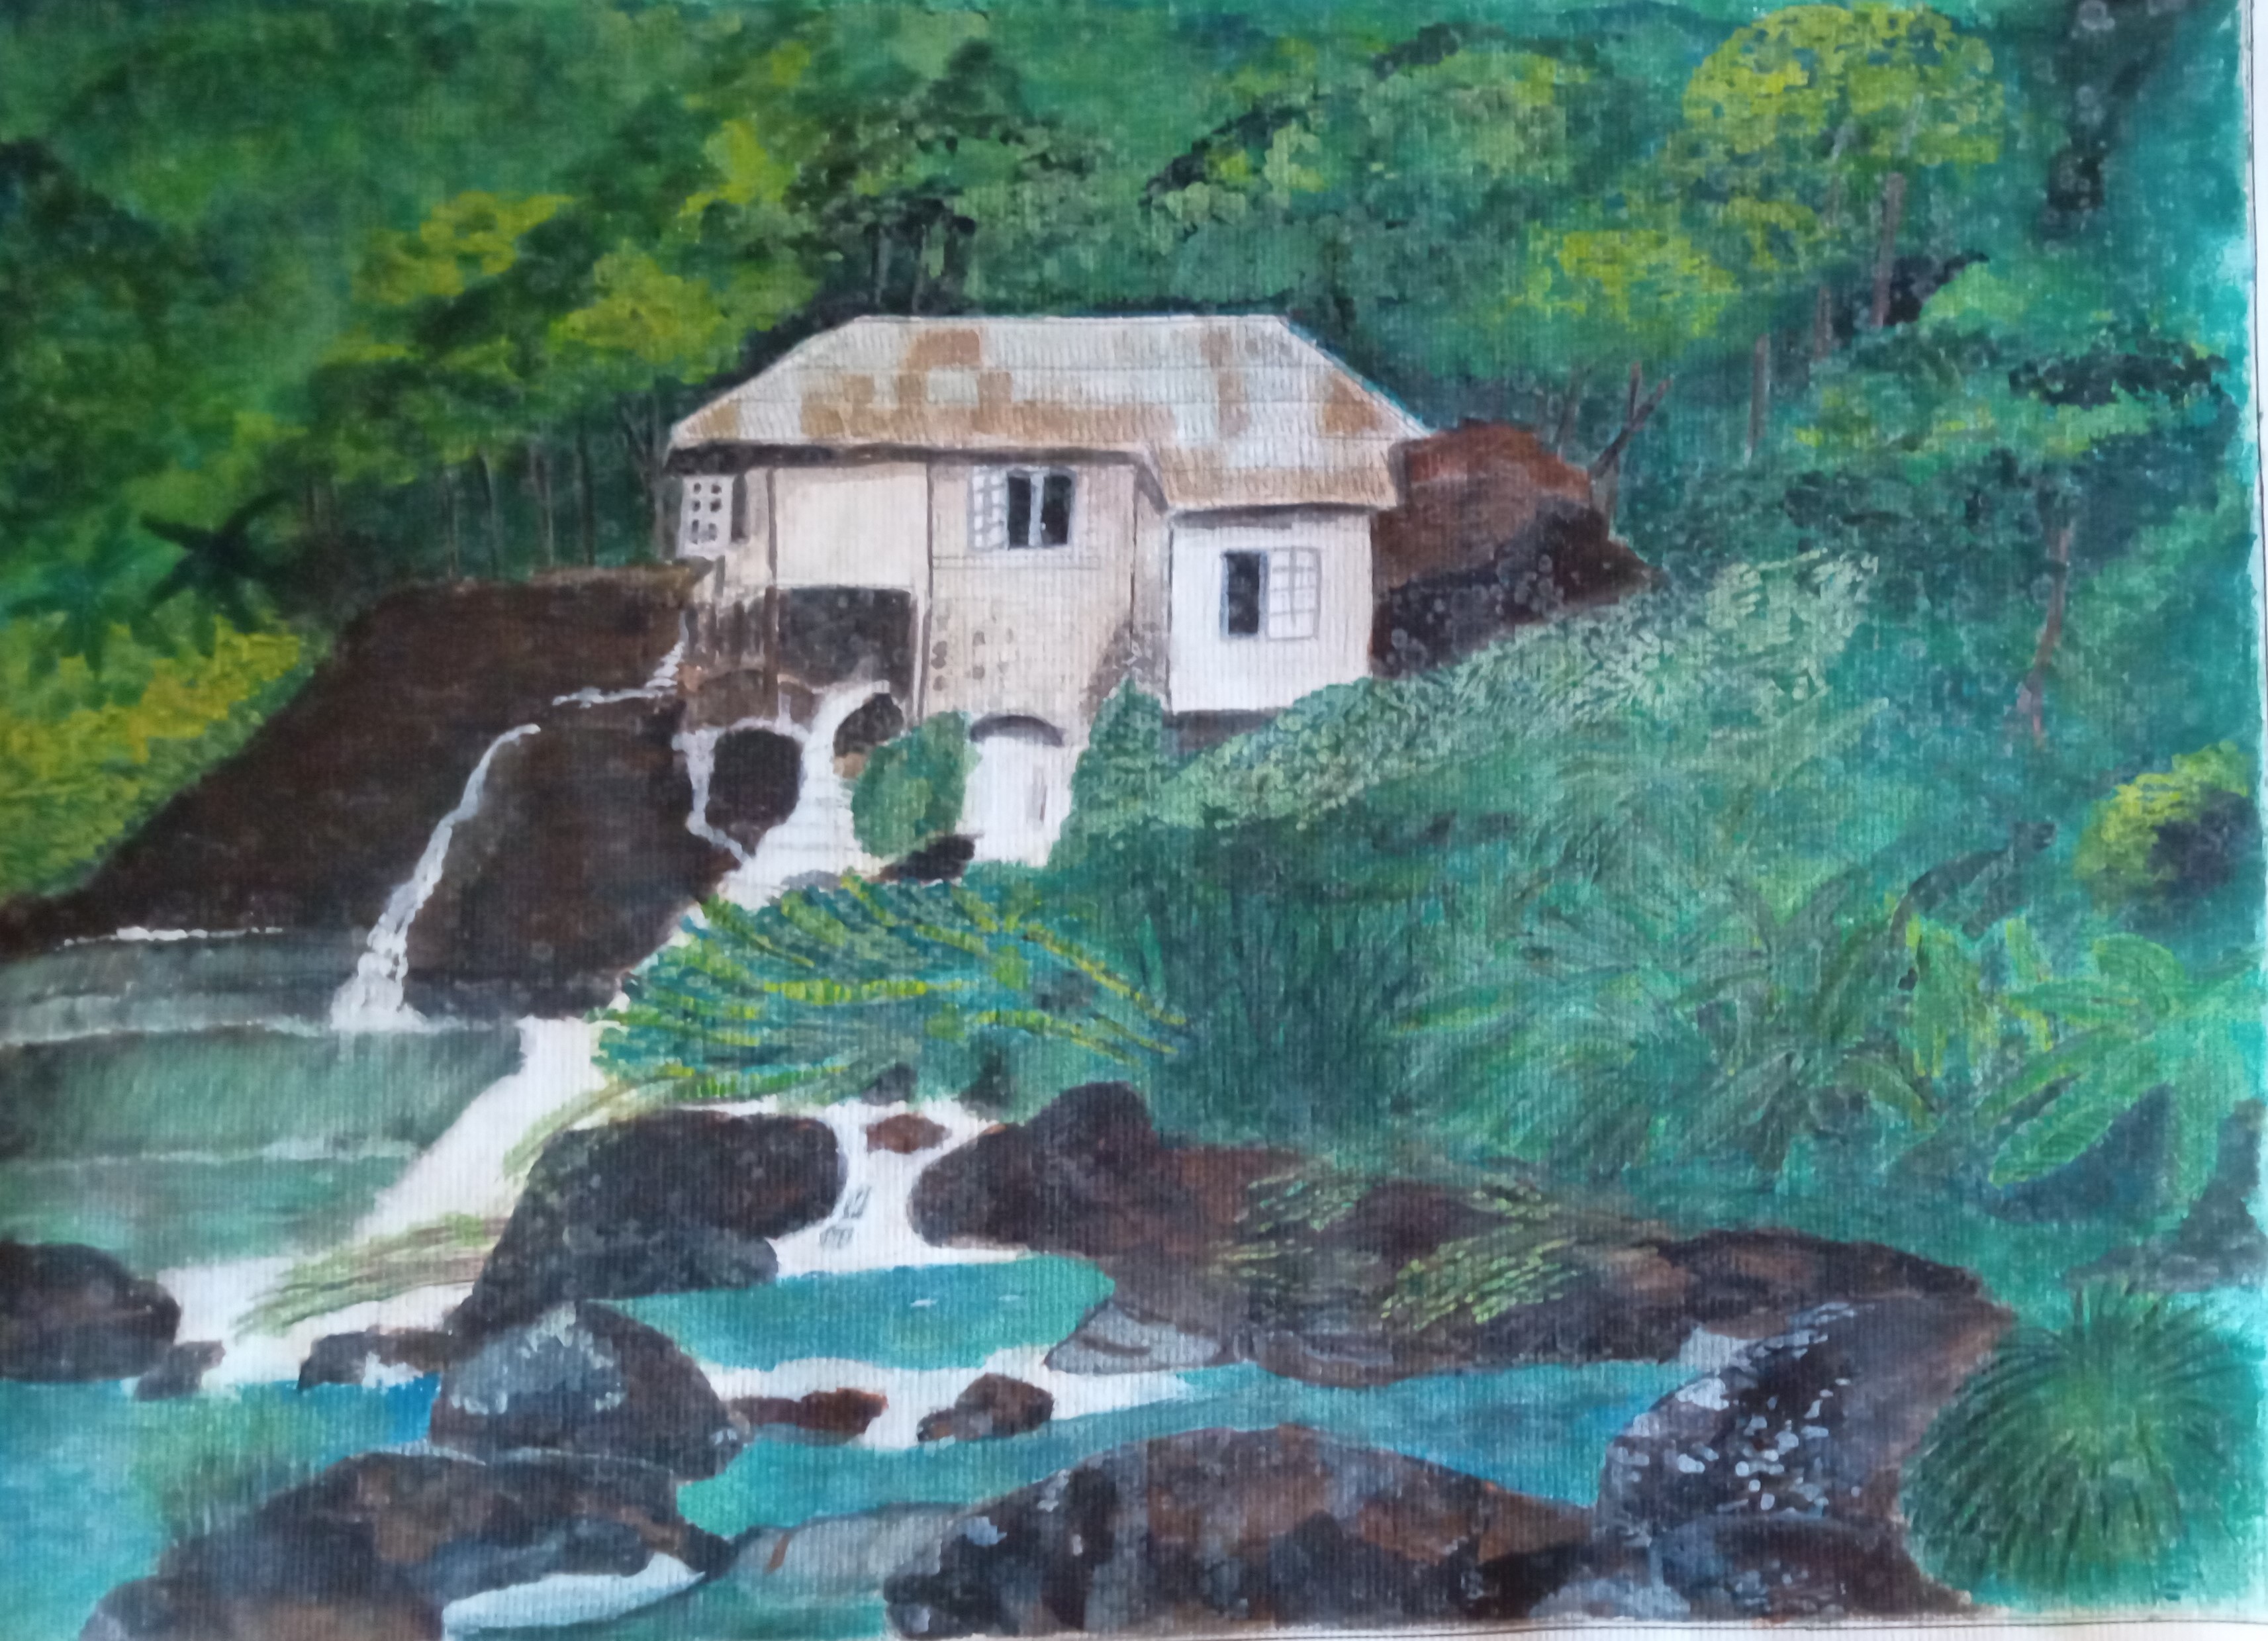 Mill in the Forest. by L.A.R.Harsha De Silva